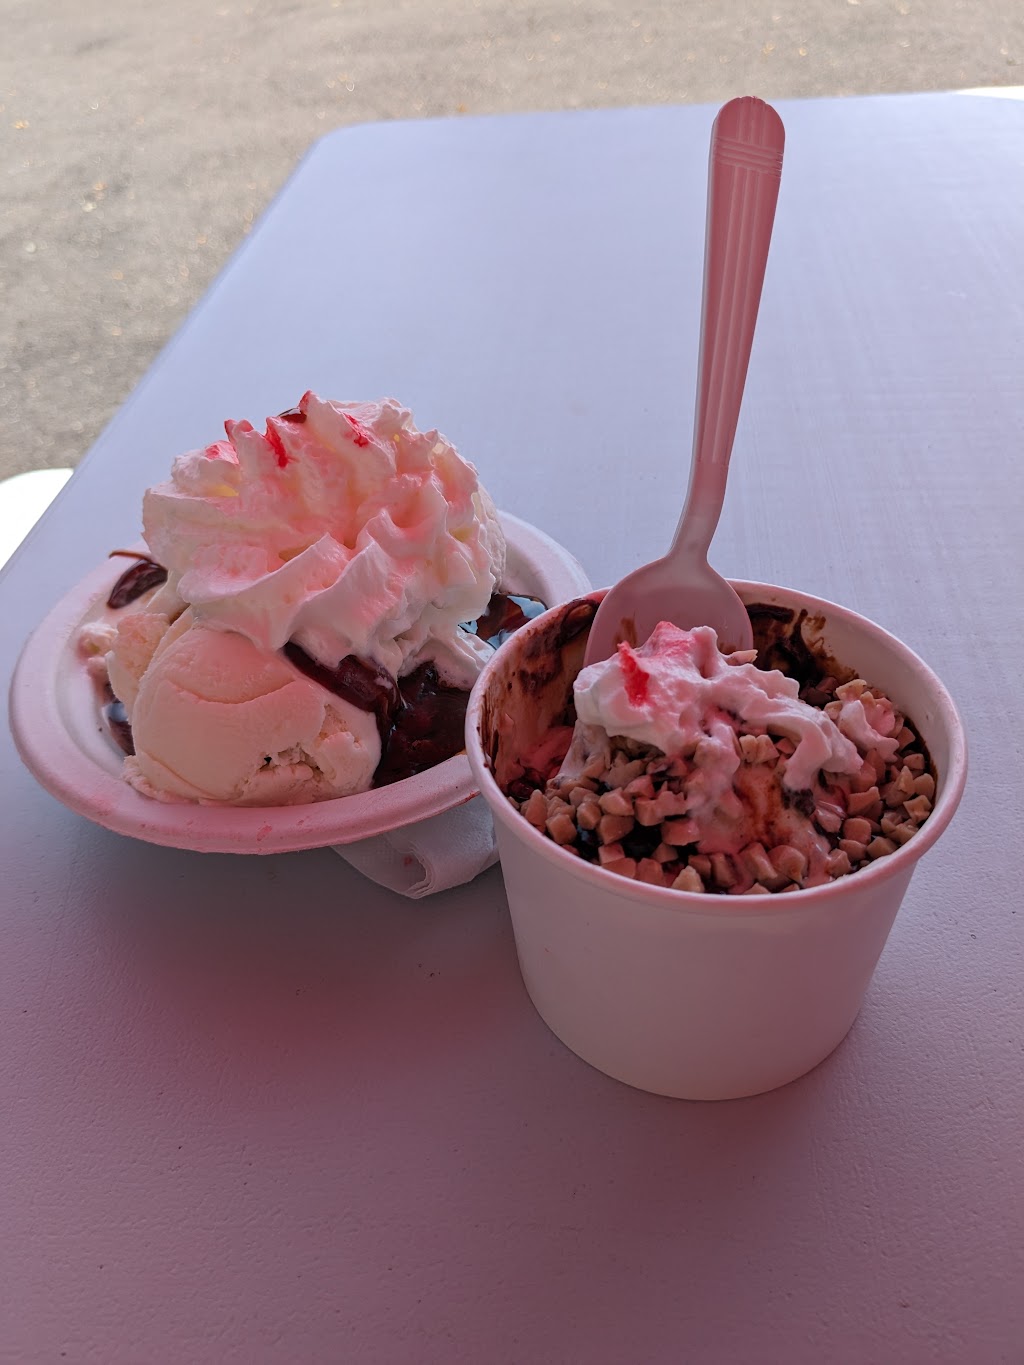 Chas Ice Cream & Grill | 329 West St, Ludlow, MA 01056 | Phone: (413) 610-0911